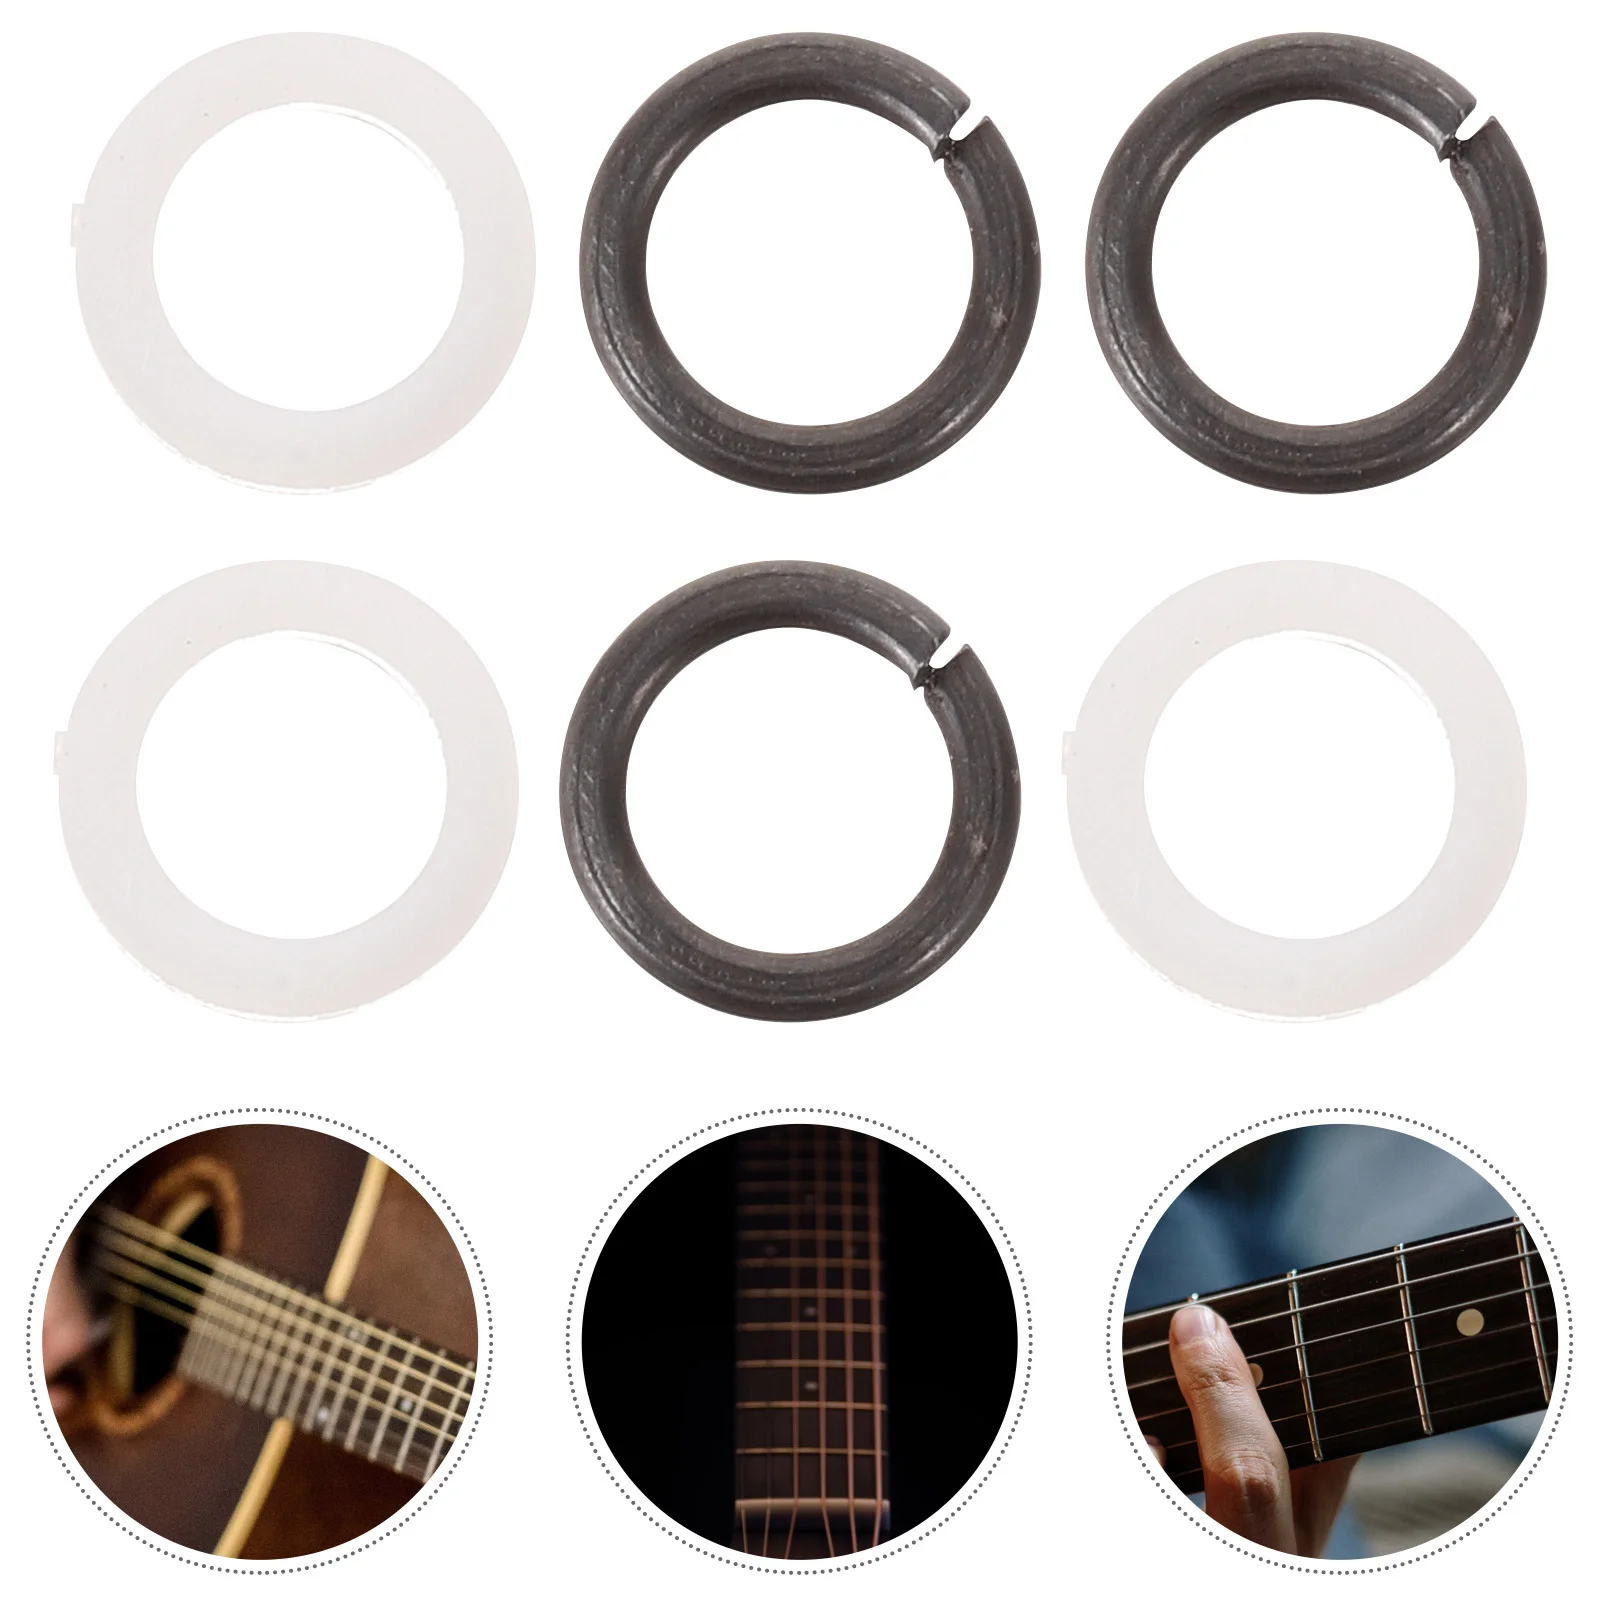 

10 Pairs Guitar Peg Spacer Electric Parts Replaceable Tuning Gasket Tuner Accessory Gaskets Professional Plastic Small